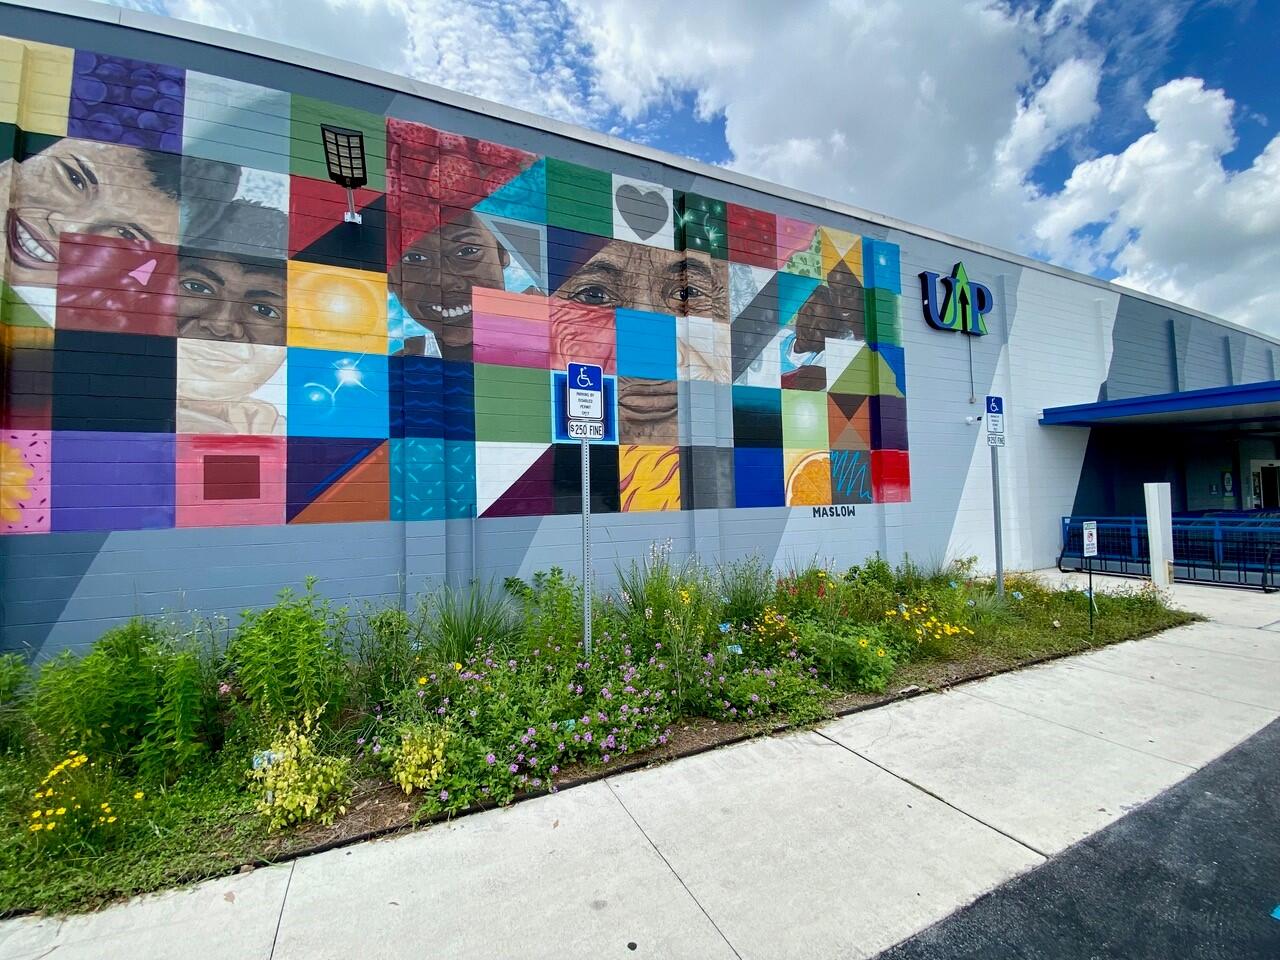 A colorful mural featuring patchwork squares of different images on the side of a building.